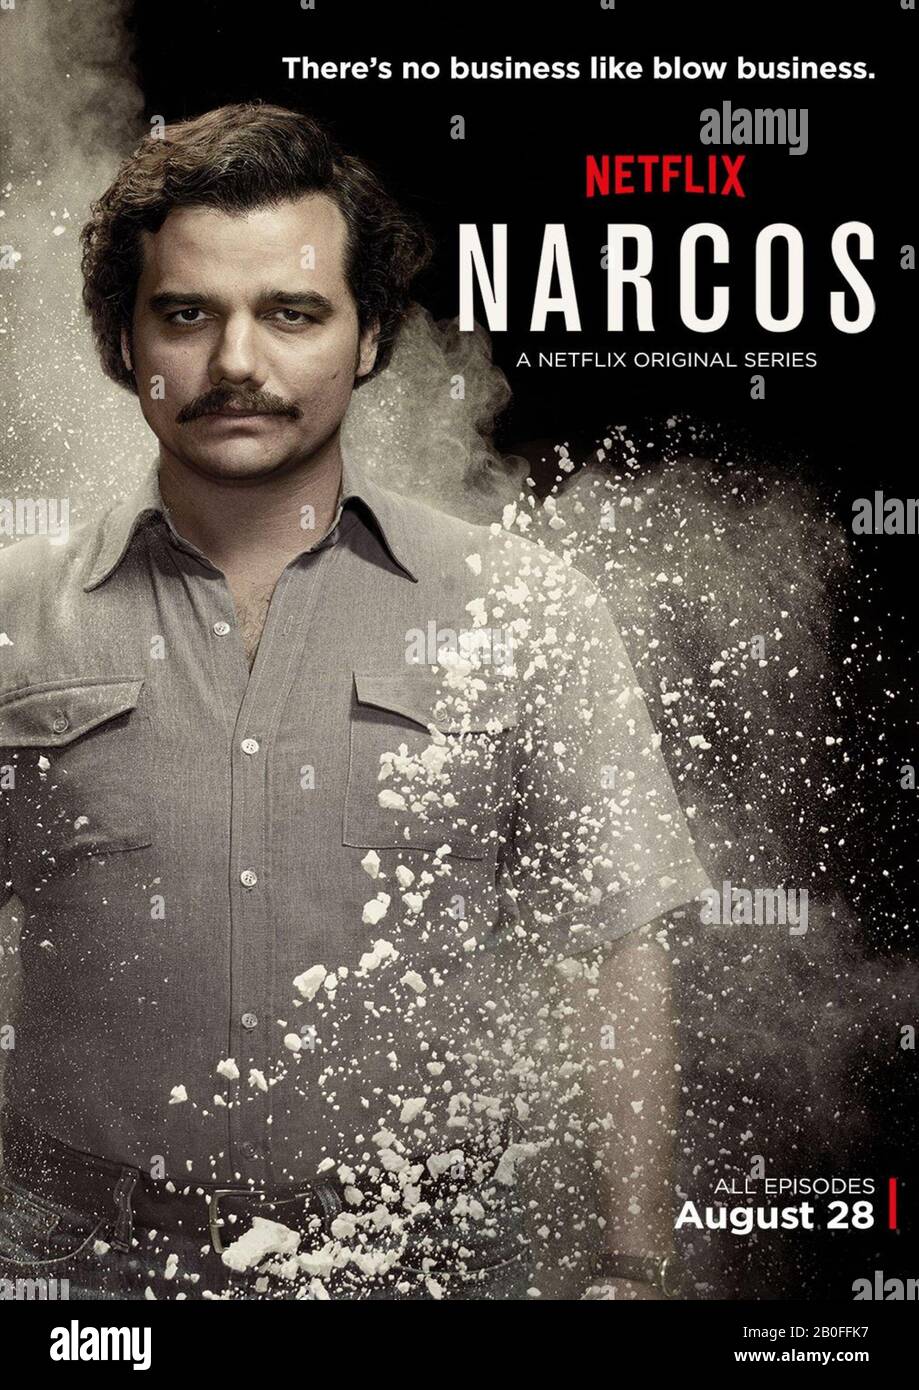 Narcos TV Series 2015-2017 USA / Colombia 2015 Season 1 Wagner Moura Poster (USA) Stock Photo